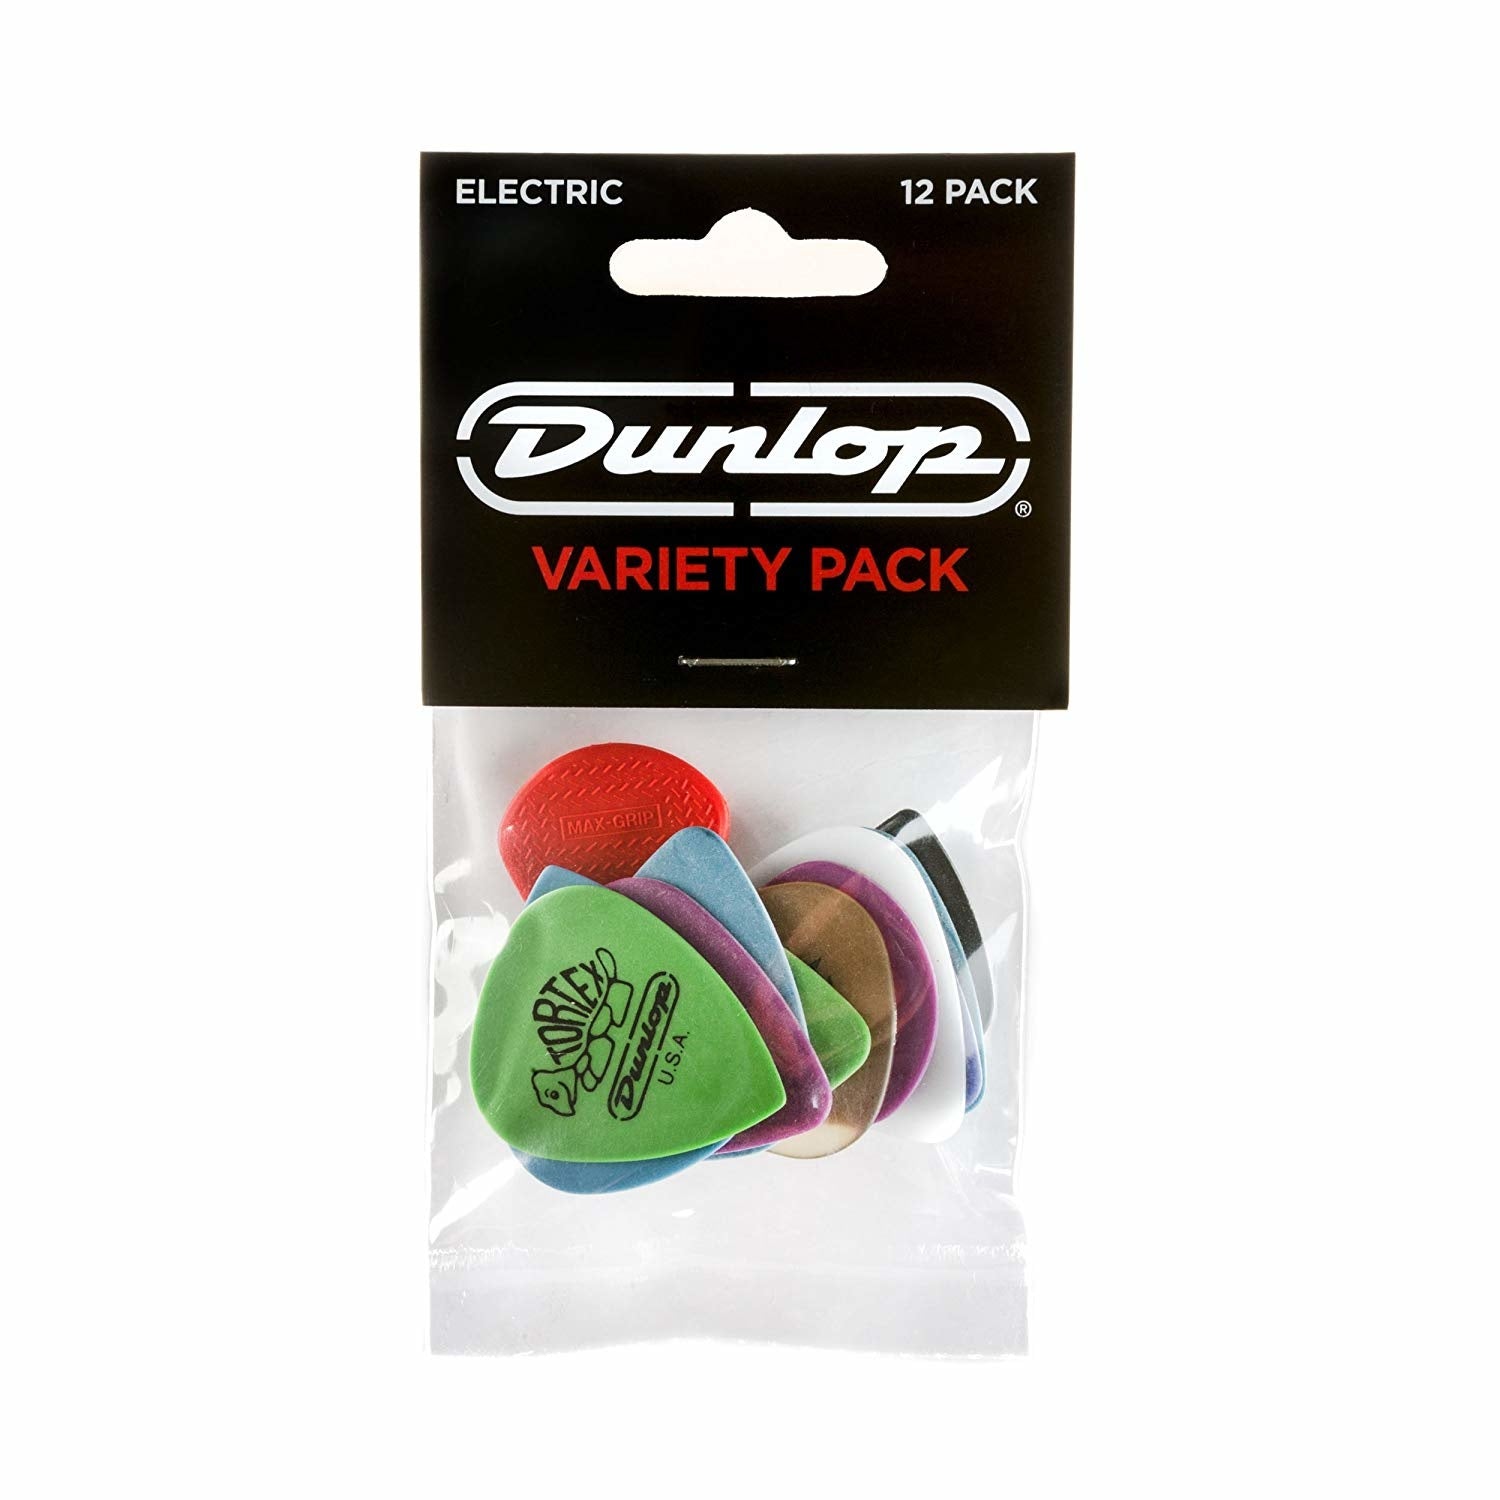 Dunlop Player's Electric Guitar Pick Variety Pack - 12 Pc